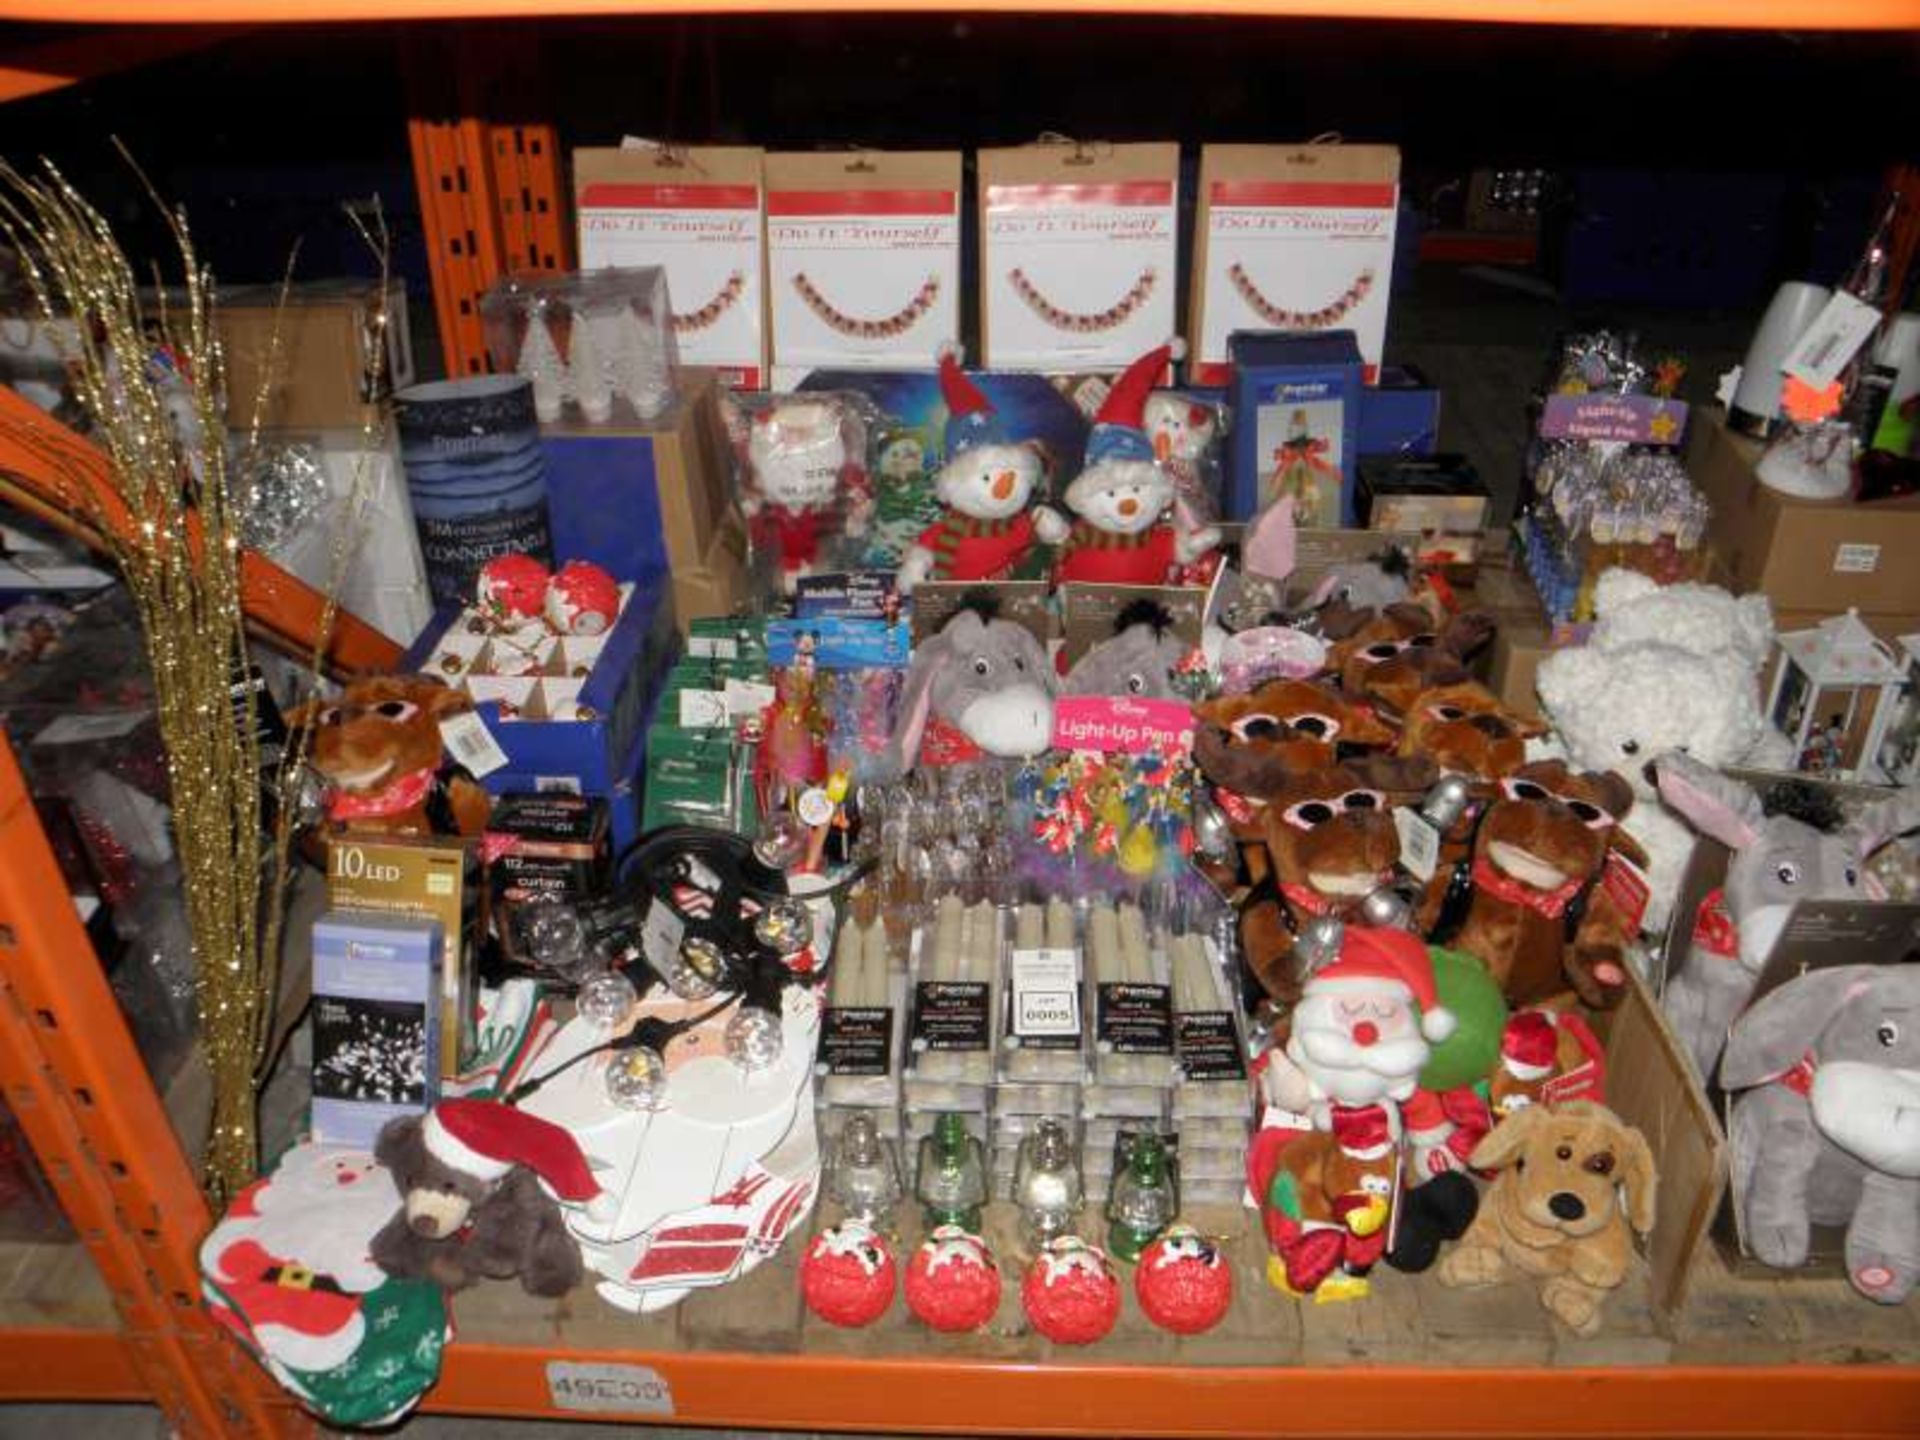 PREMIER CHRISTMAS LOT CONTAINING MUSICAL CHARACTERS, DANCING FLAME CANDLES, LIGHTS, BAUBLES, SNOW